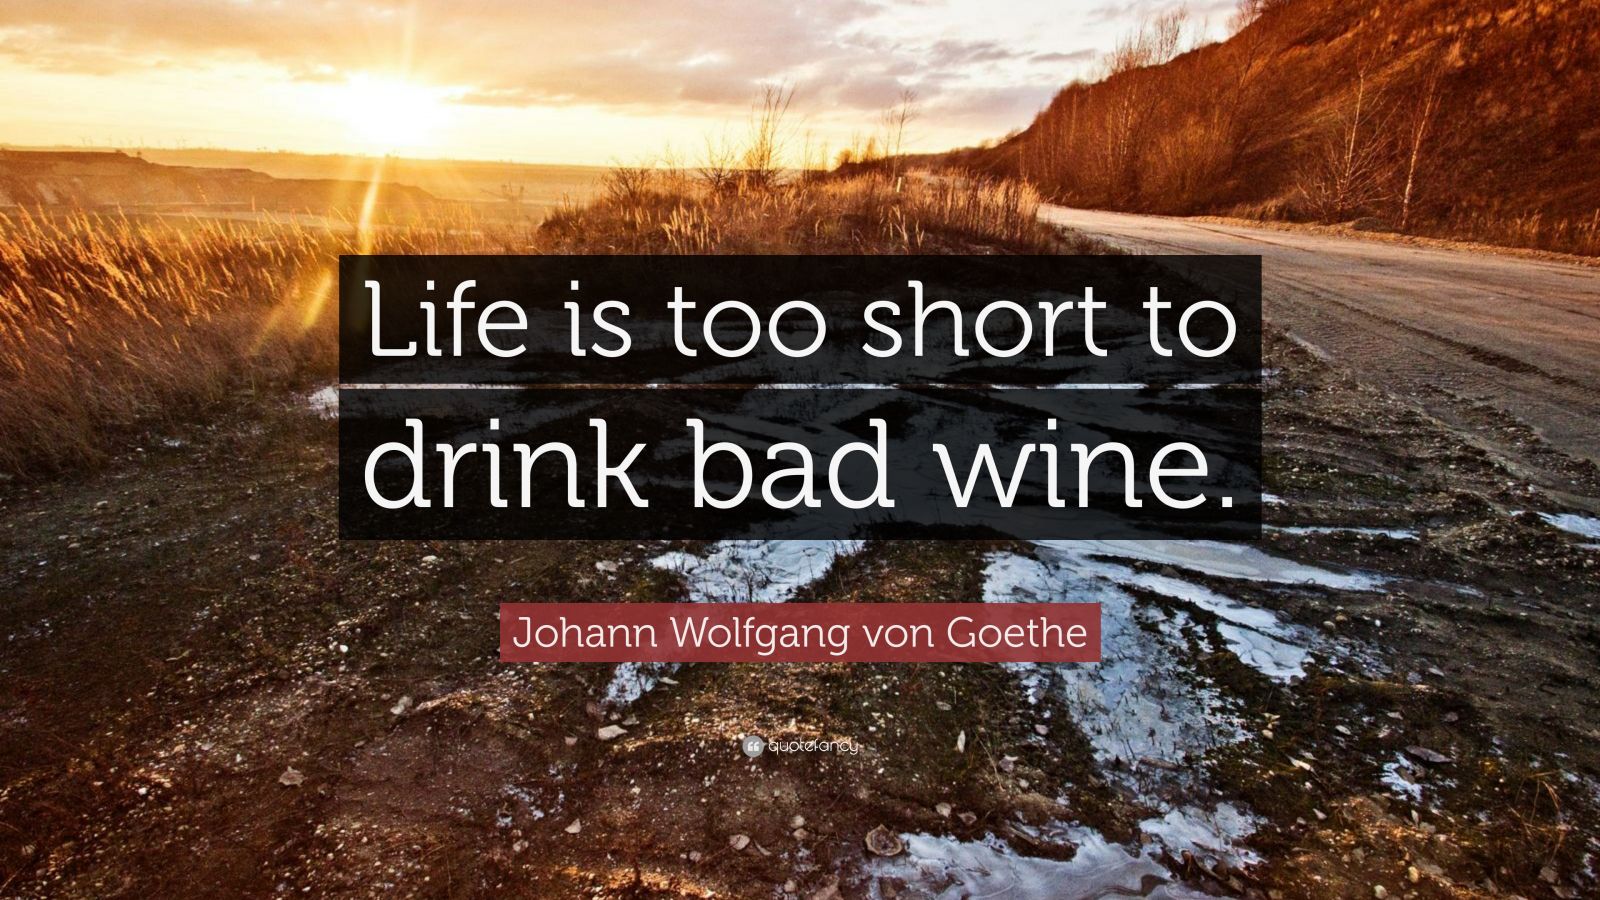 Johann Wolfgang Von Goethe Quote “life Is Too Short To